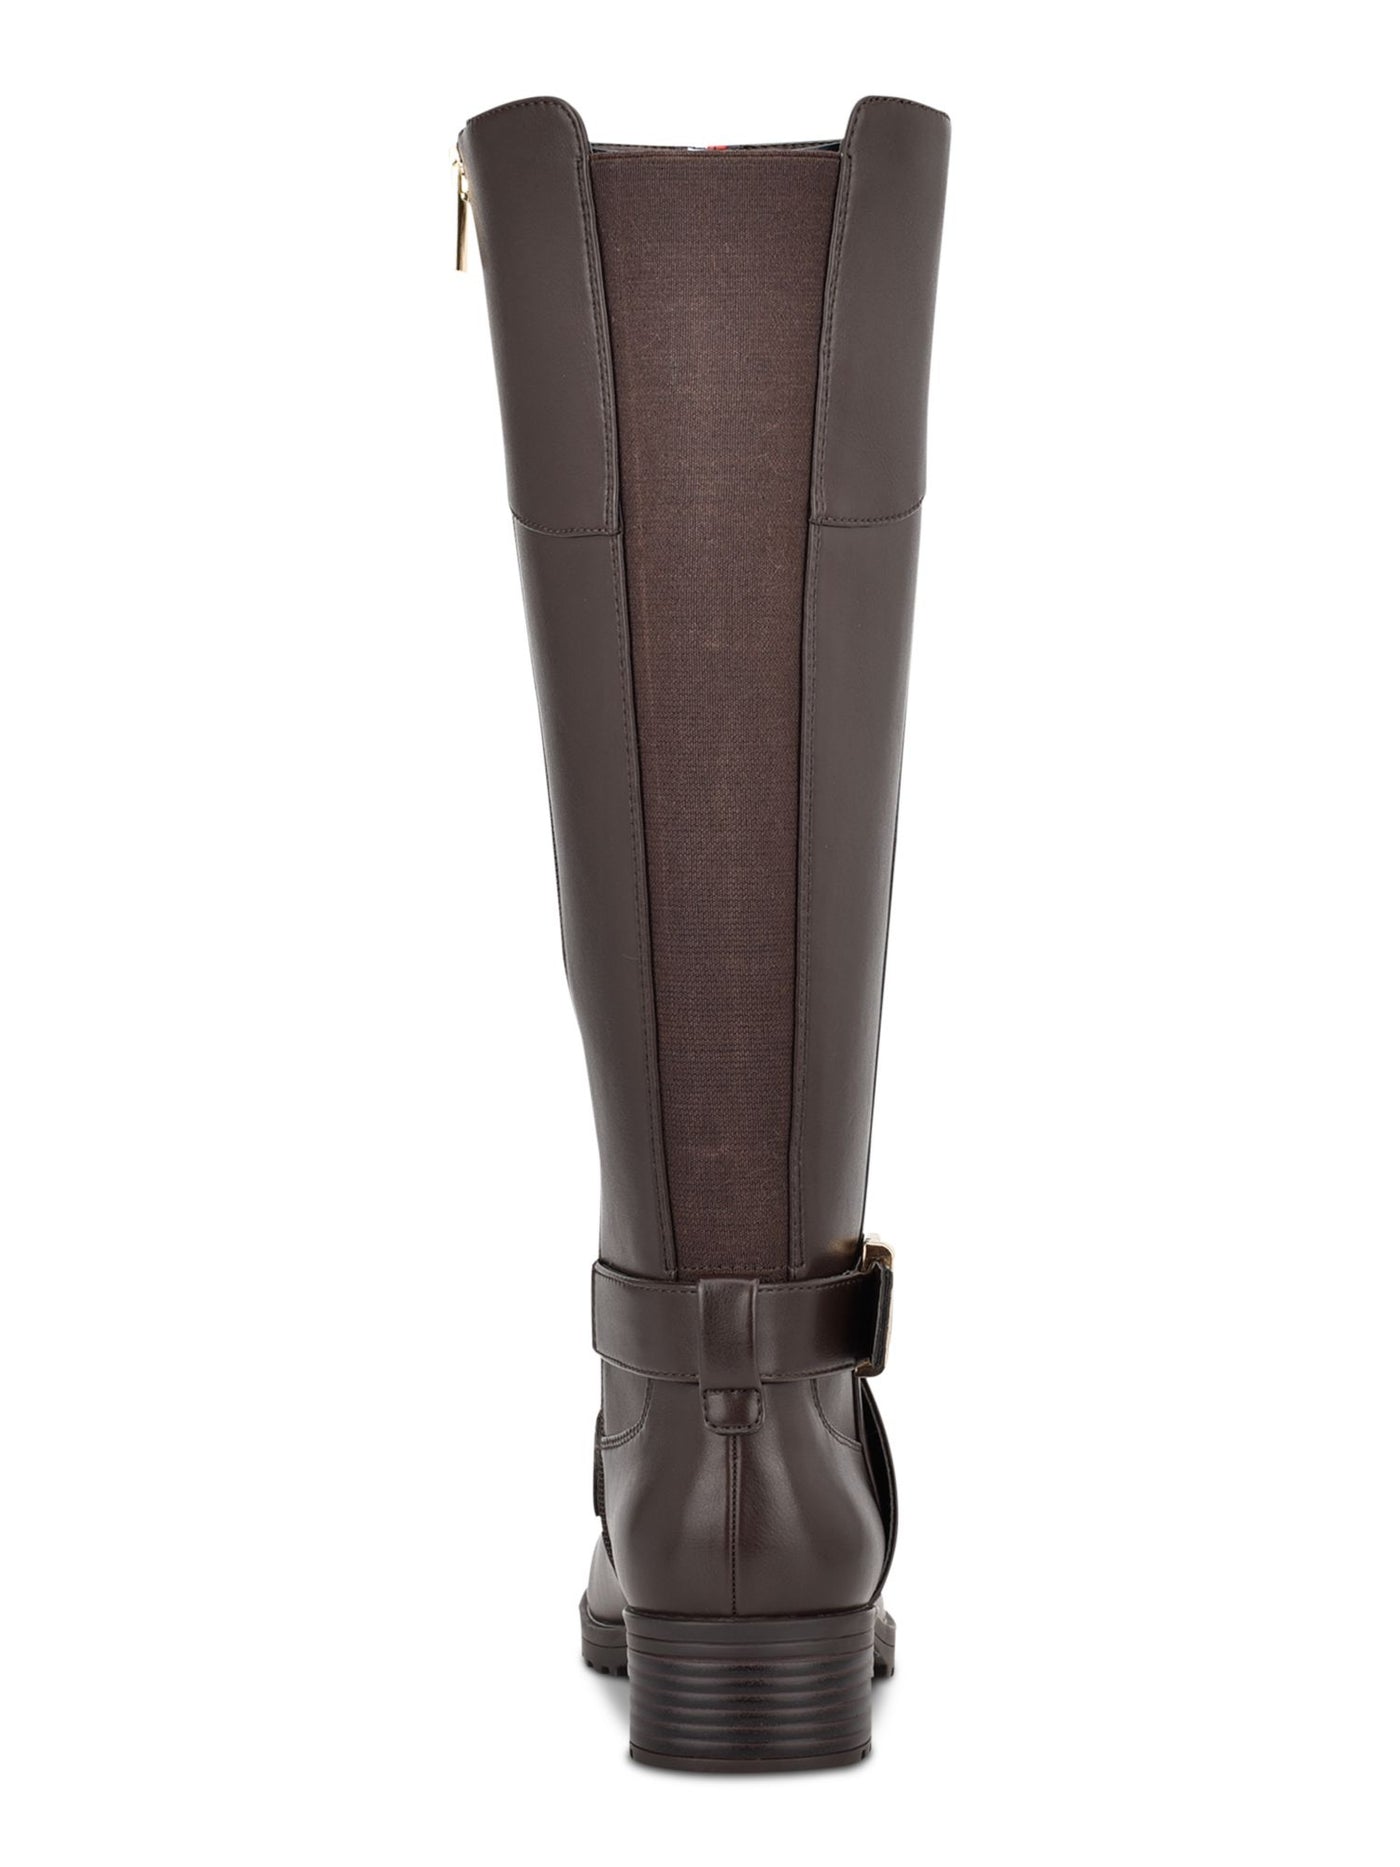 TOMMY HILFIGER Womens Brown Ankle Strap Buckle Accent Round Toe Block Heel Zip-Up Riding Boot 7